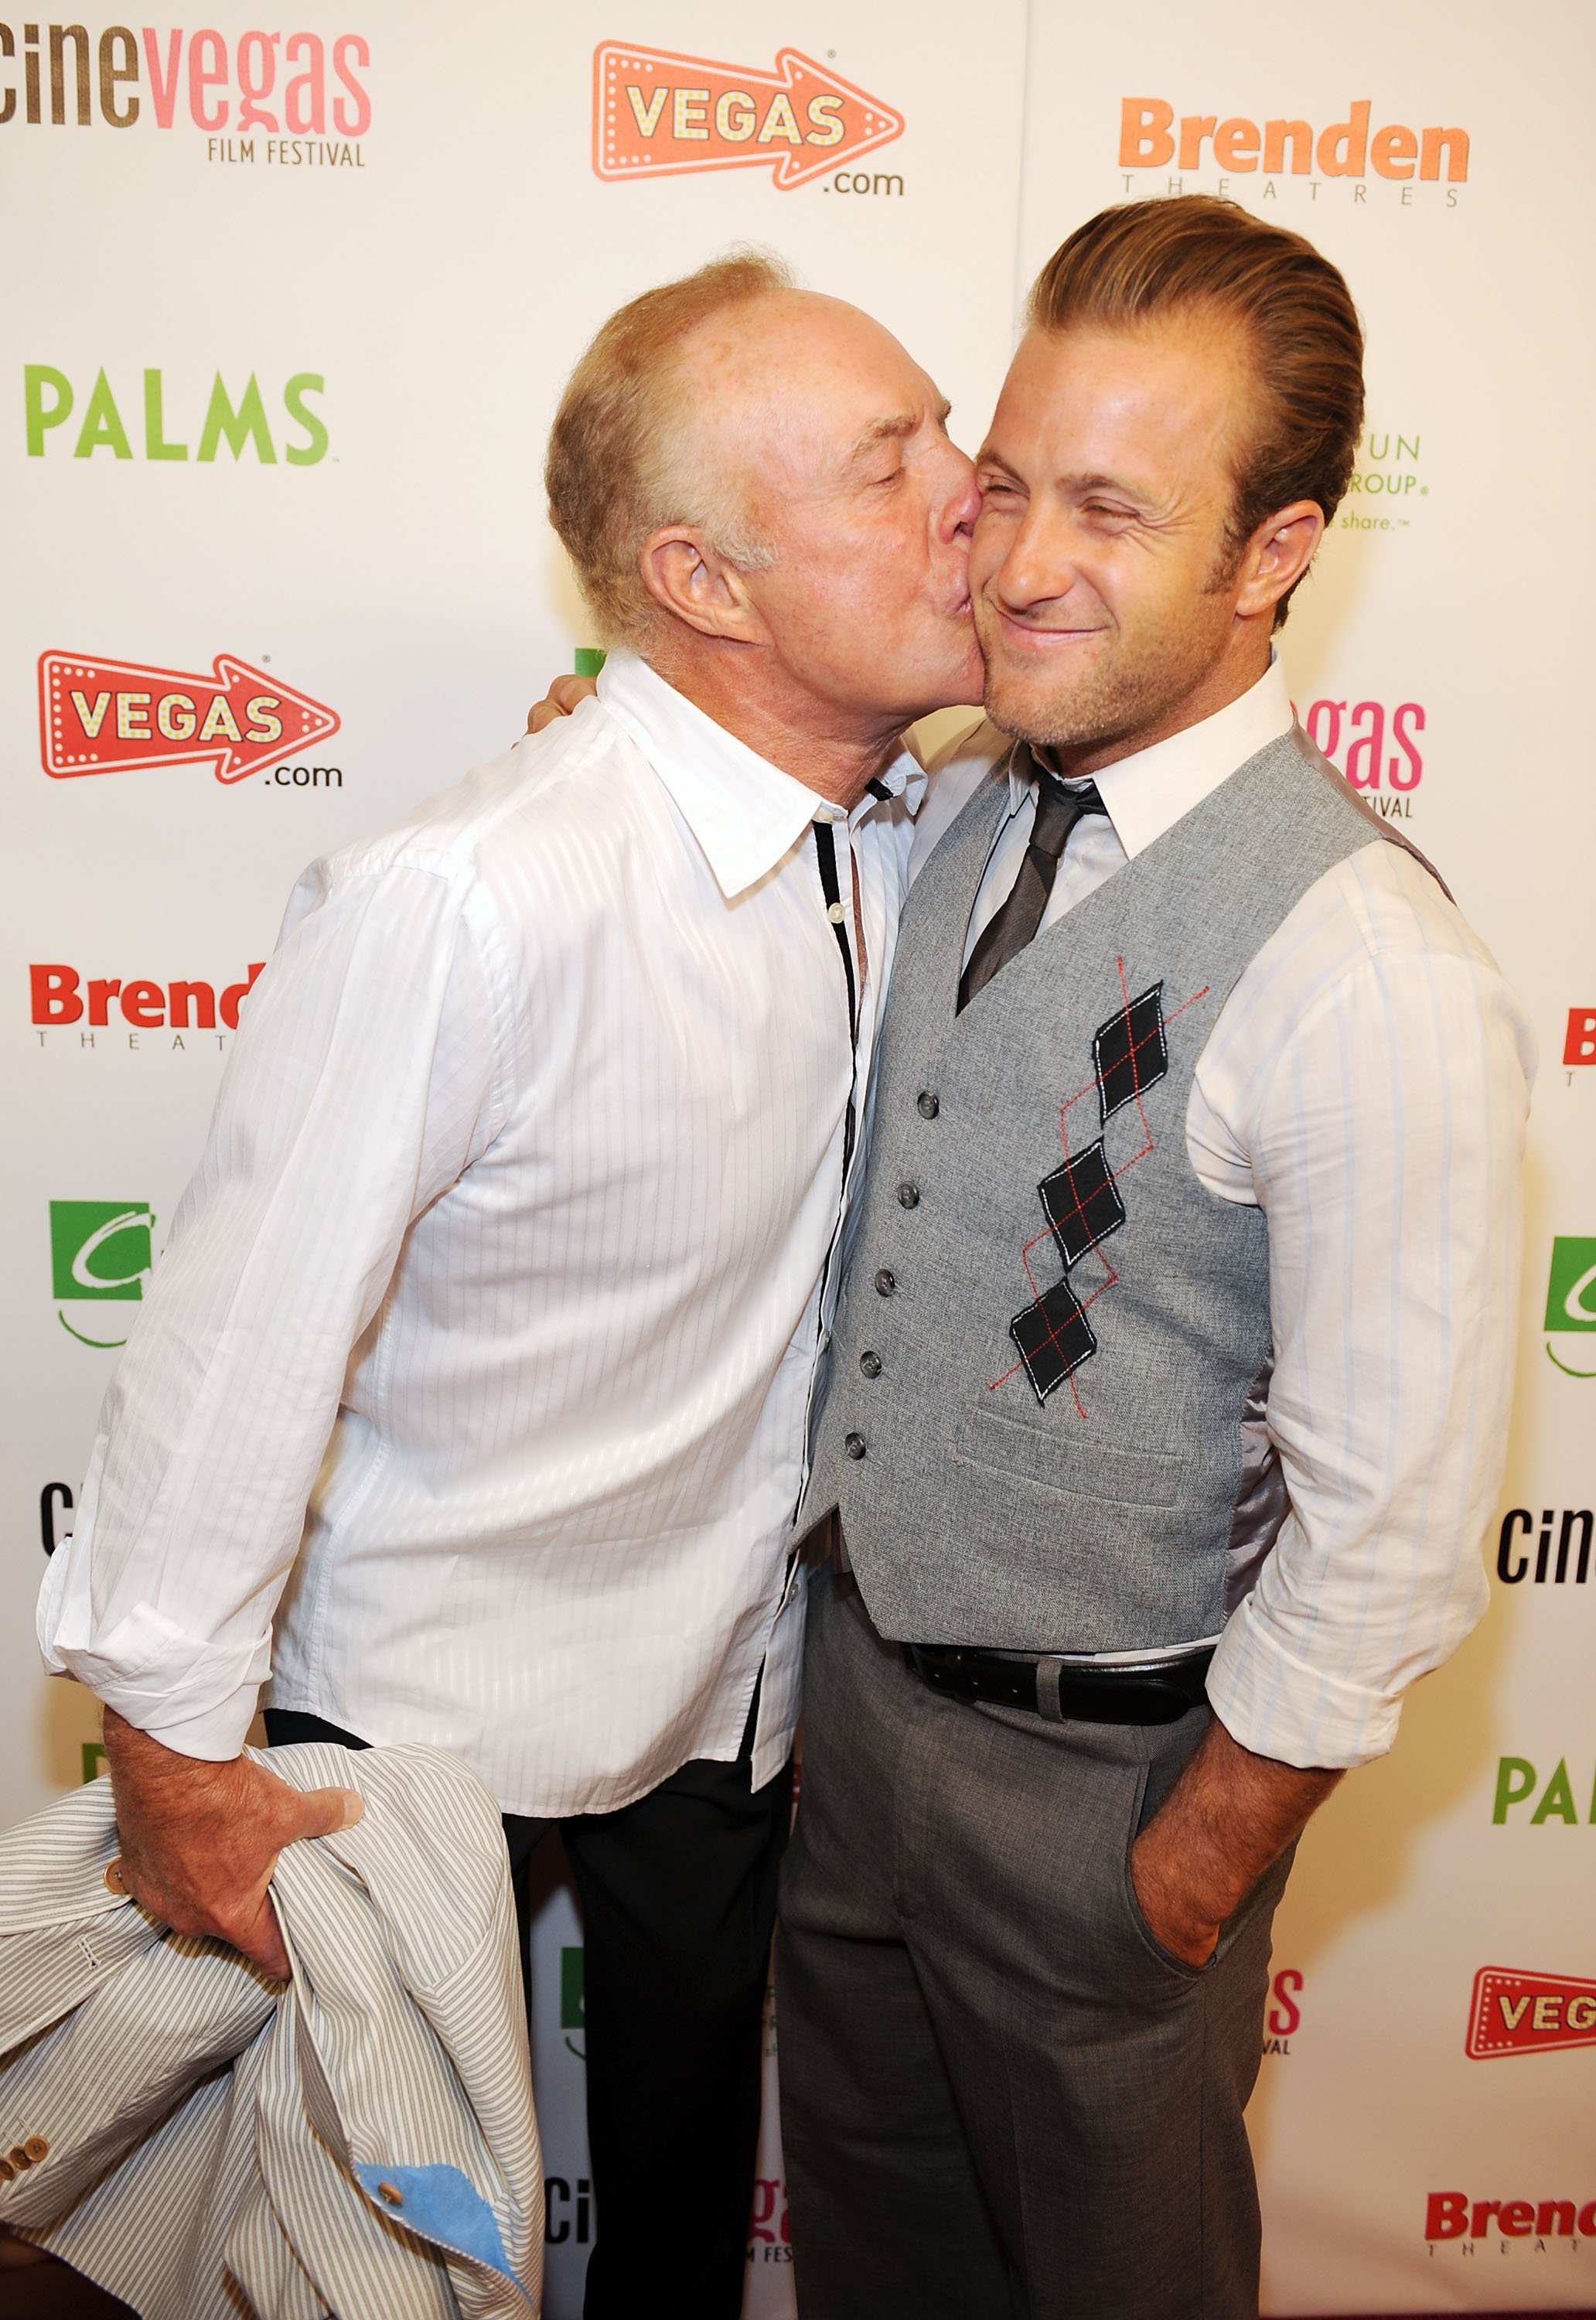 Actor James Caan and actor Scott Caan arrives at the "Mercy" red carpet during the 11th annual CineVegas film festival at the Brenden Theatres at The Palms Casino Resort on June 14, 2009 in Las Vegas, Nevada. | Source: Getty Images 